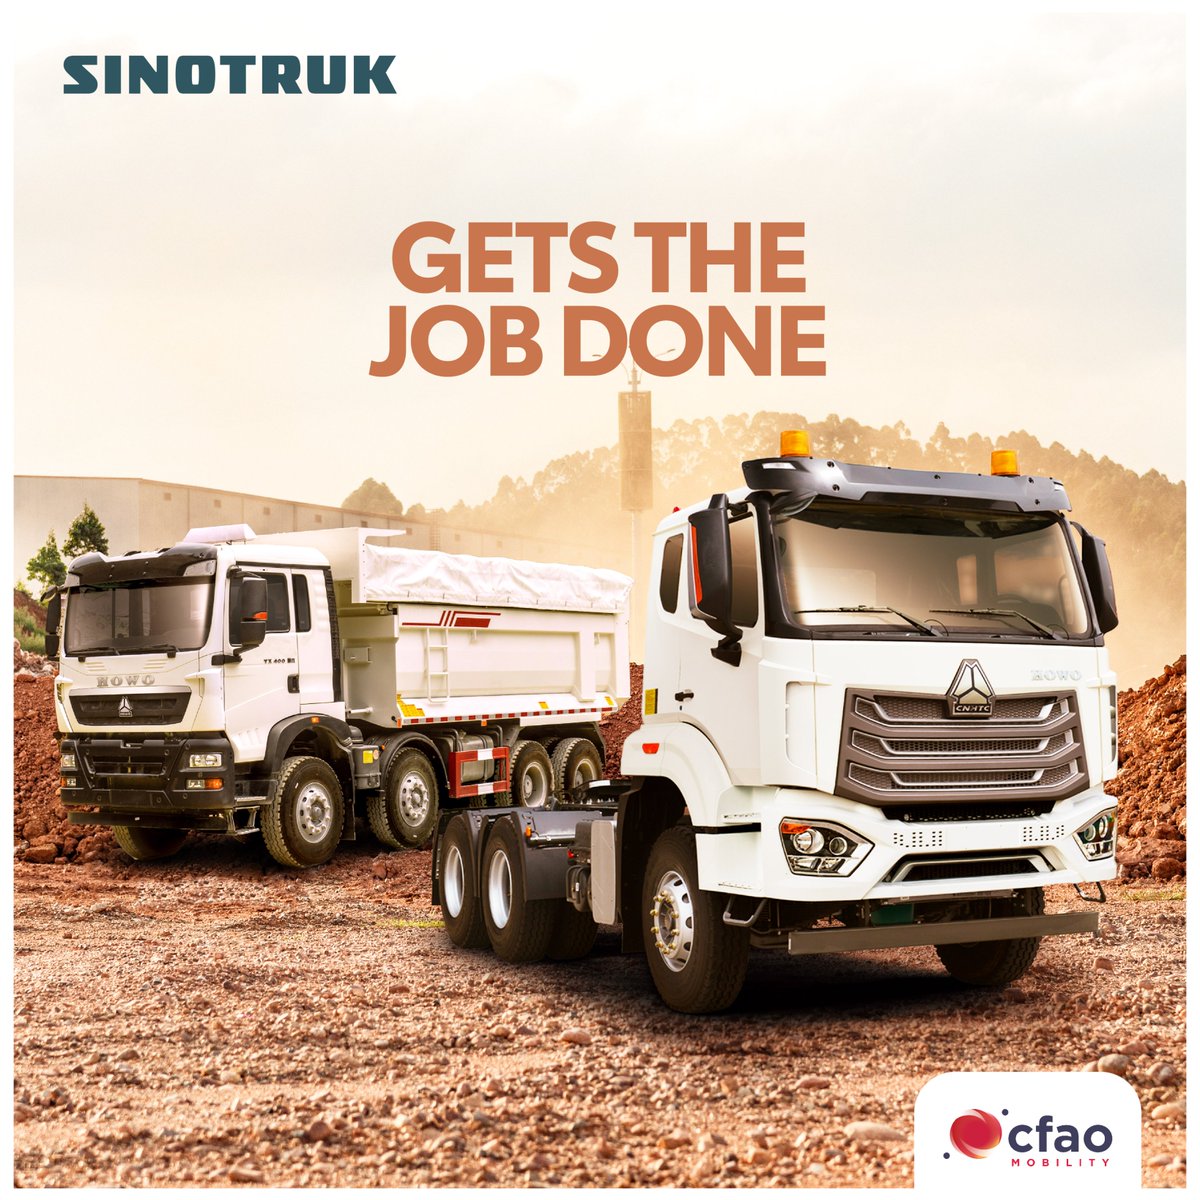 When it comes to carrying heavy loads, trust the SINOTRUK to deliver.🚚  

#SinoTruk #CFAOMobility